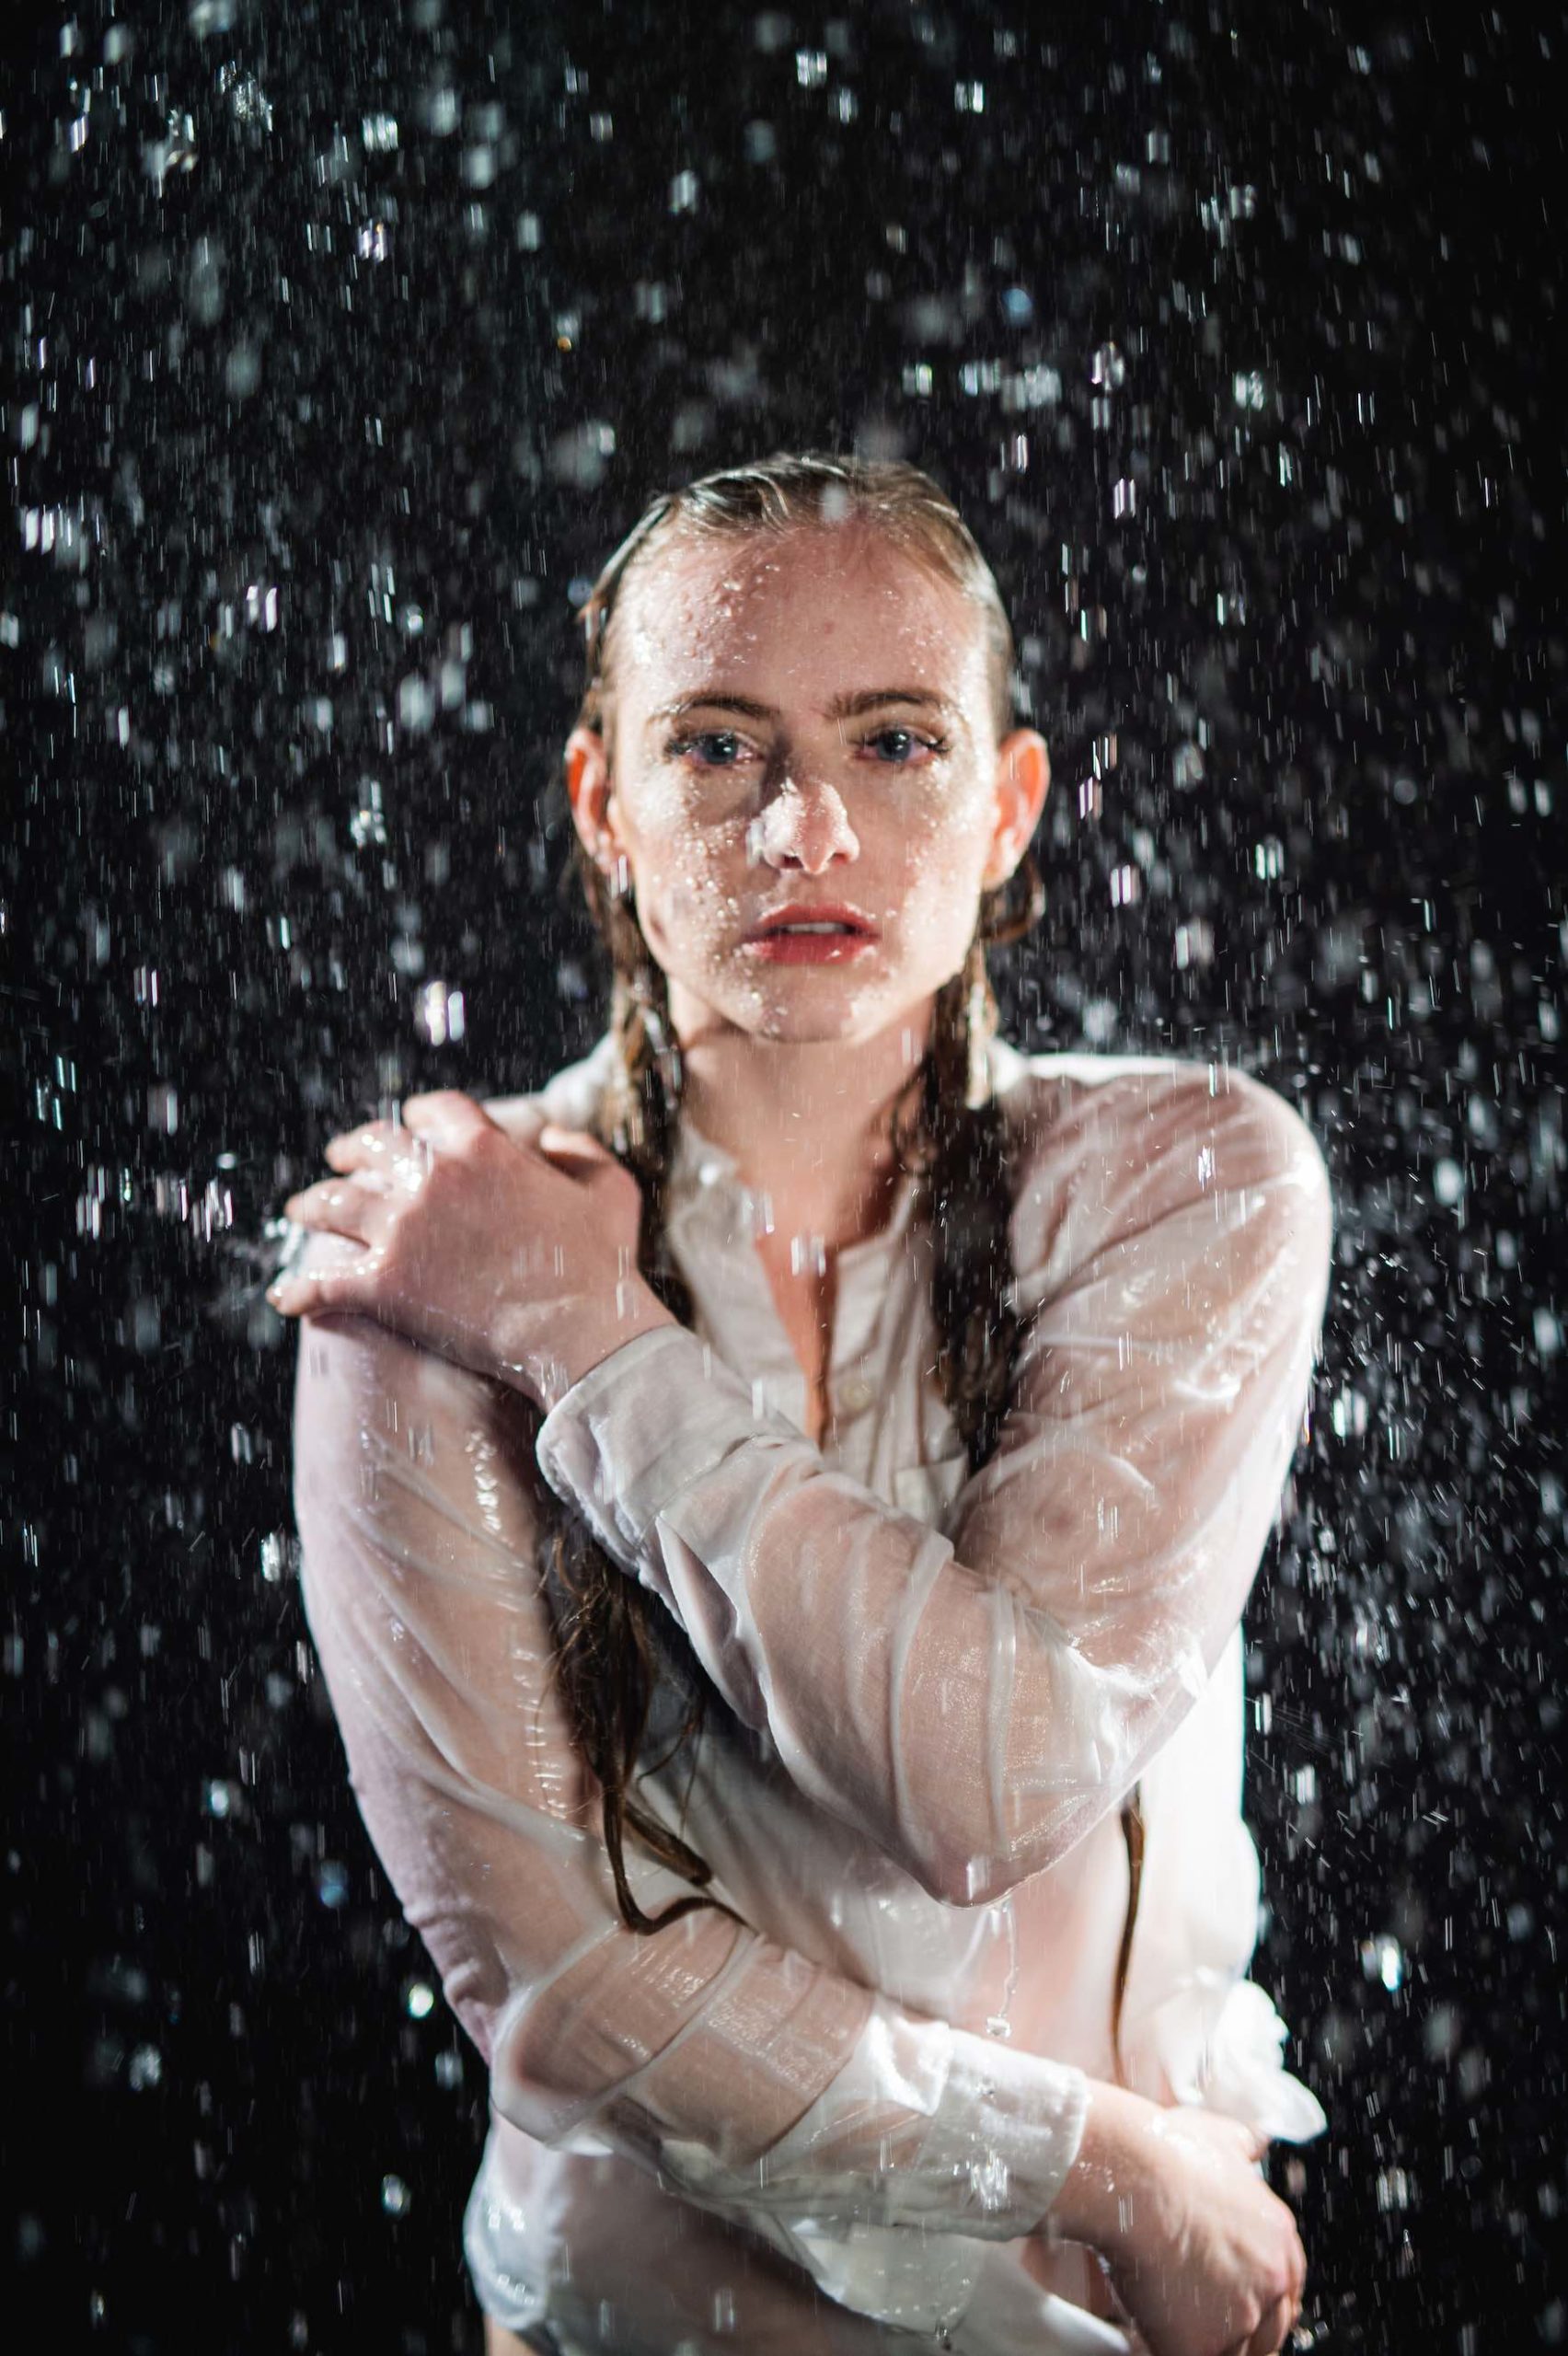 Crew Call Rain and Water Woman with long hair and soaked through white shirt posing for the camera under a shower of water